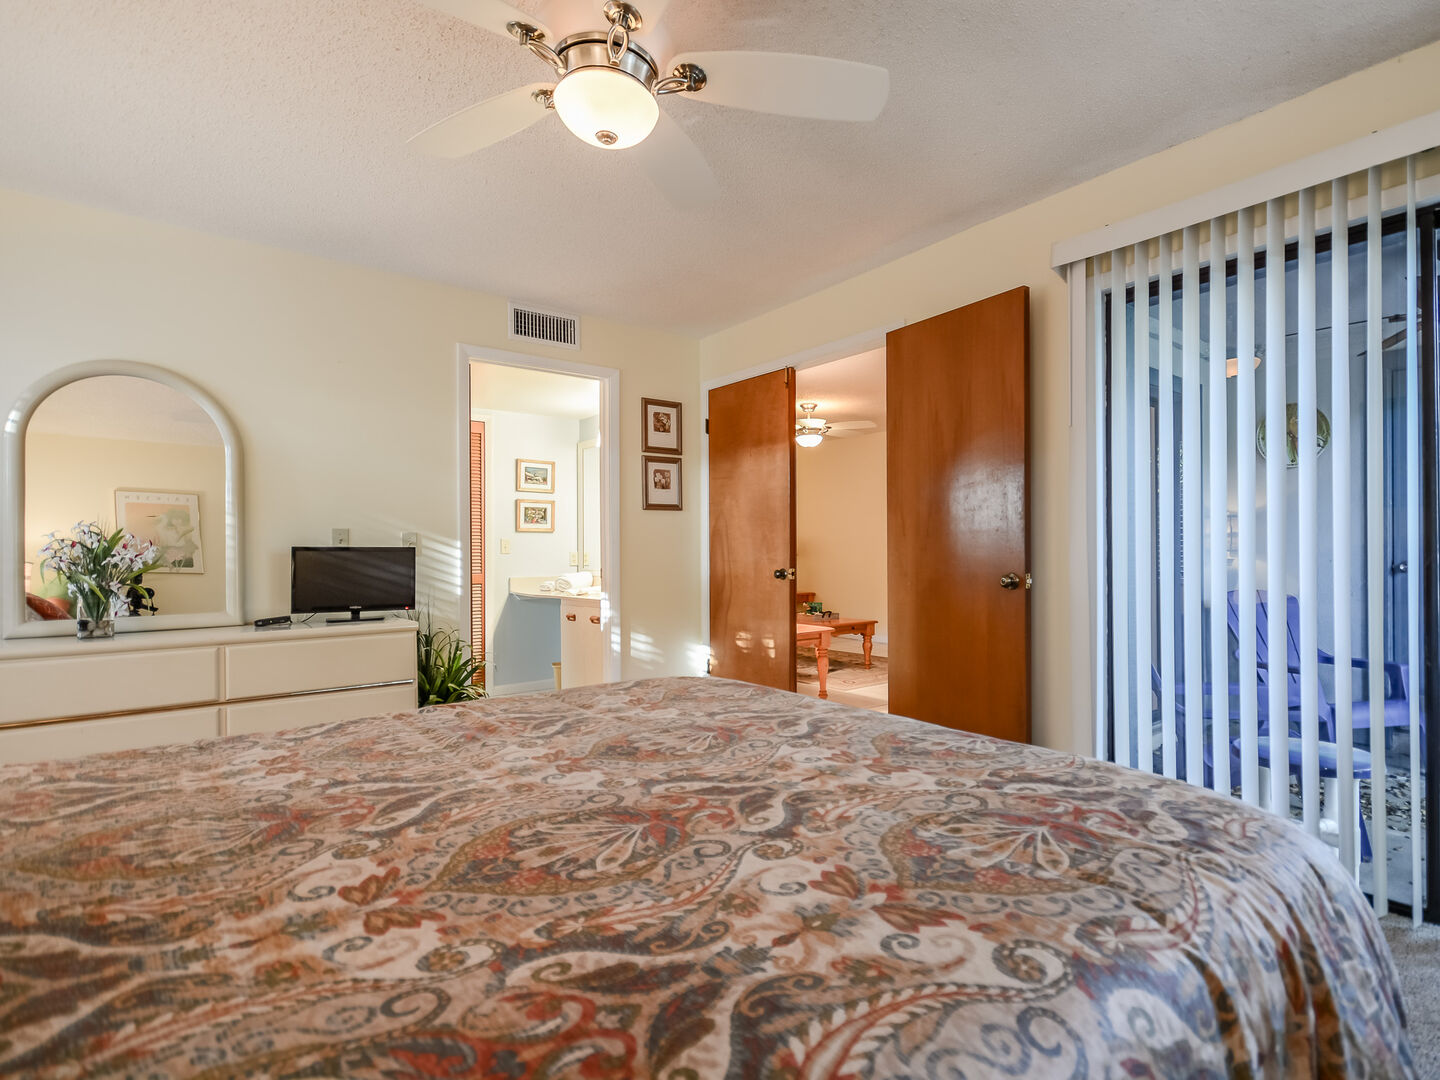 The master bedroom also features a flat screen HDTV, private bath and sliders to the patio.